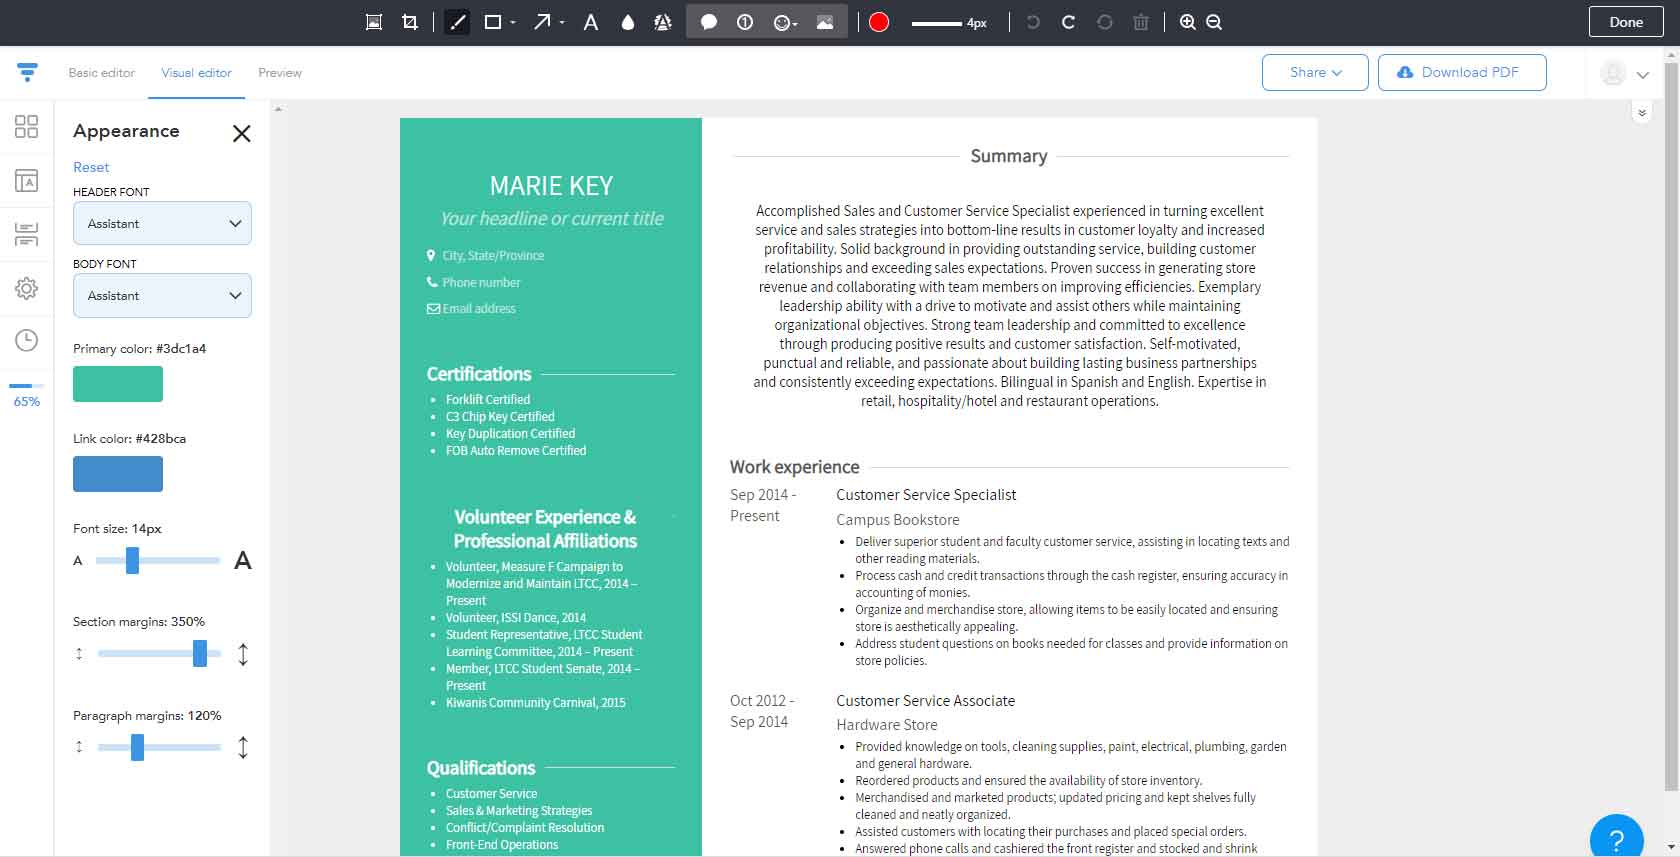 VisualCV Resume Creator allows users to create visually interesting résumés, cover letters, and websites that can be externally shared with prospective employers, using prebuilt templates. Sample résumés help users target their résumés for different job types.